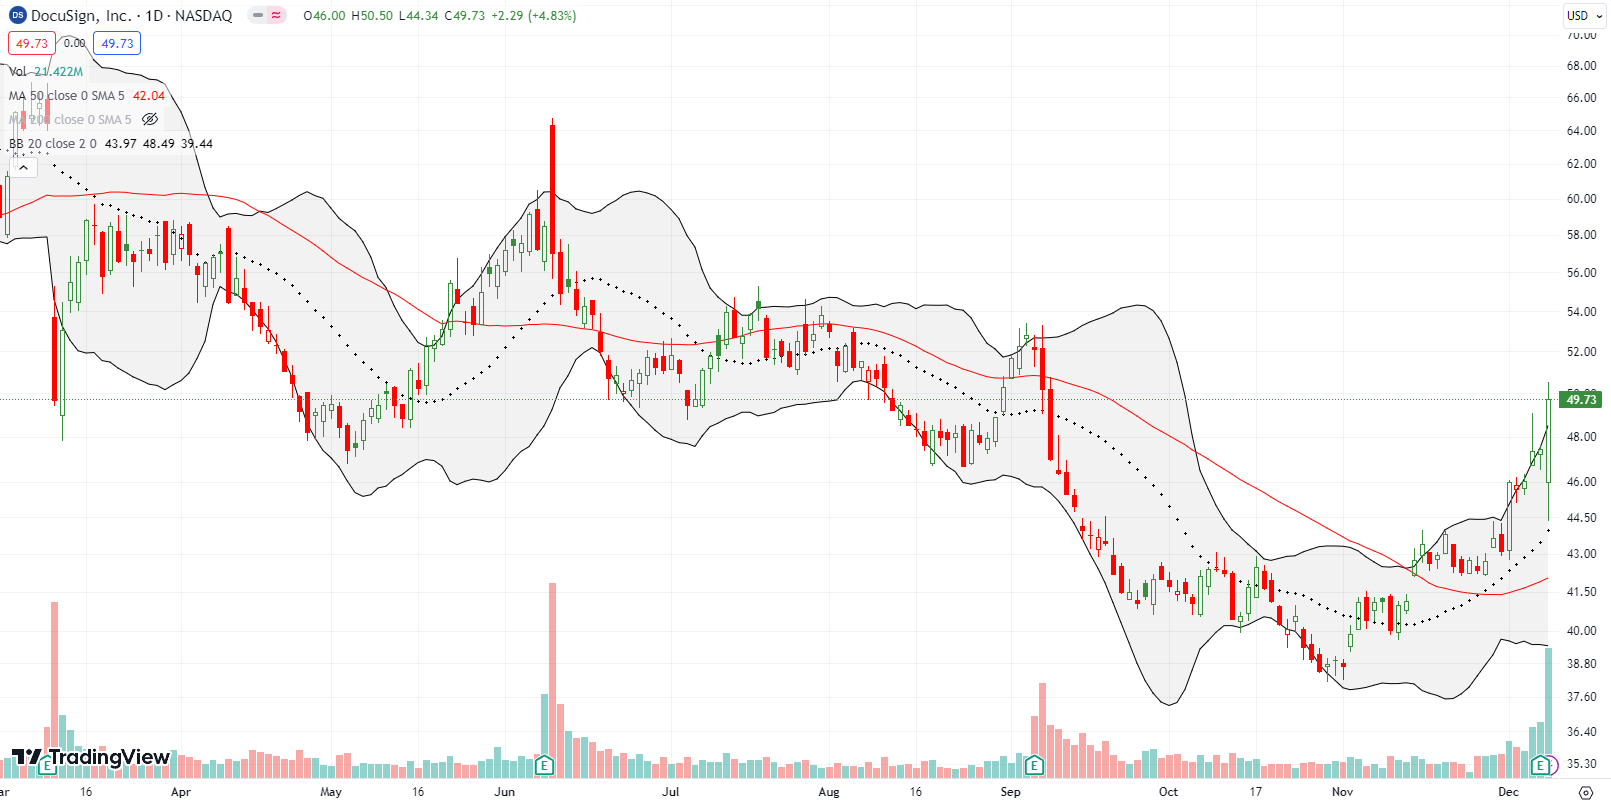 Docusign Inc (DOCU) swung through a wild post-earnings reaction, first with a gap down and test of 20DMA support and last with a 3-month high.